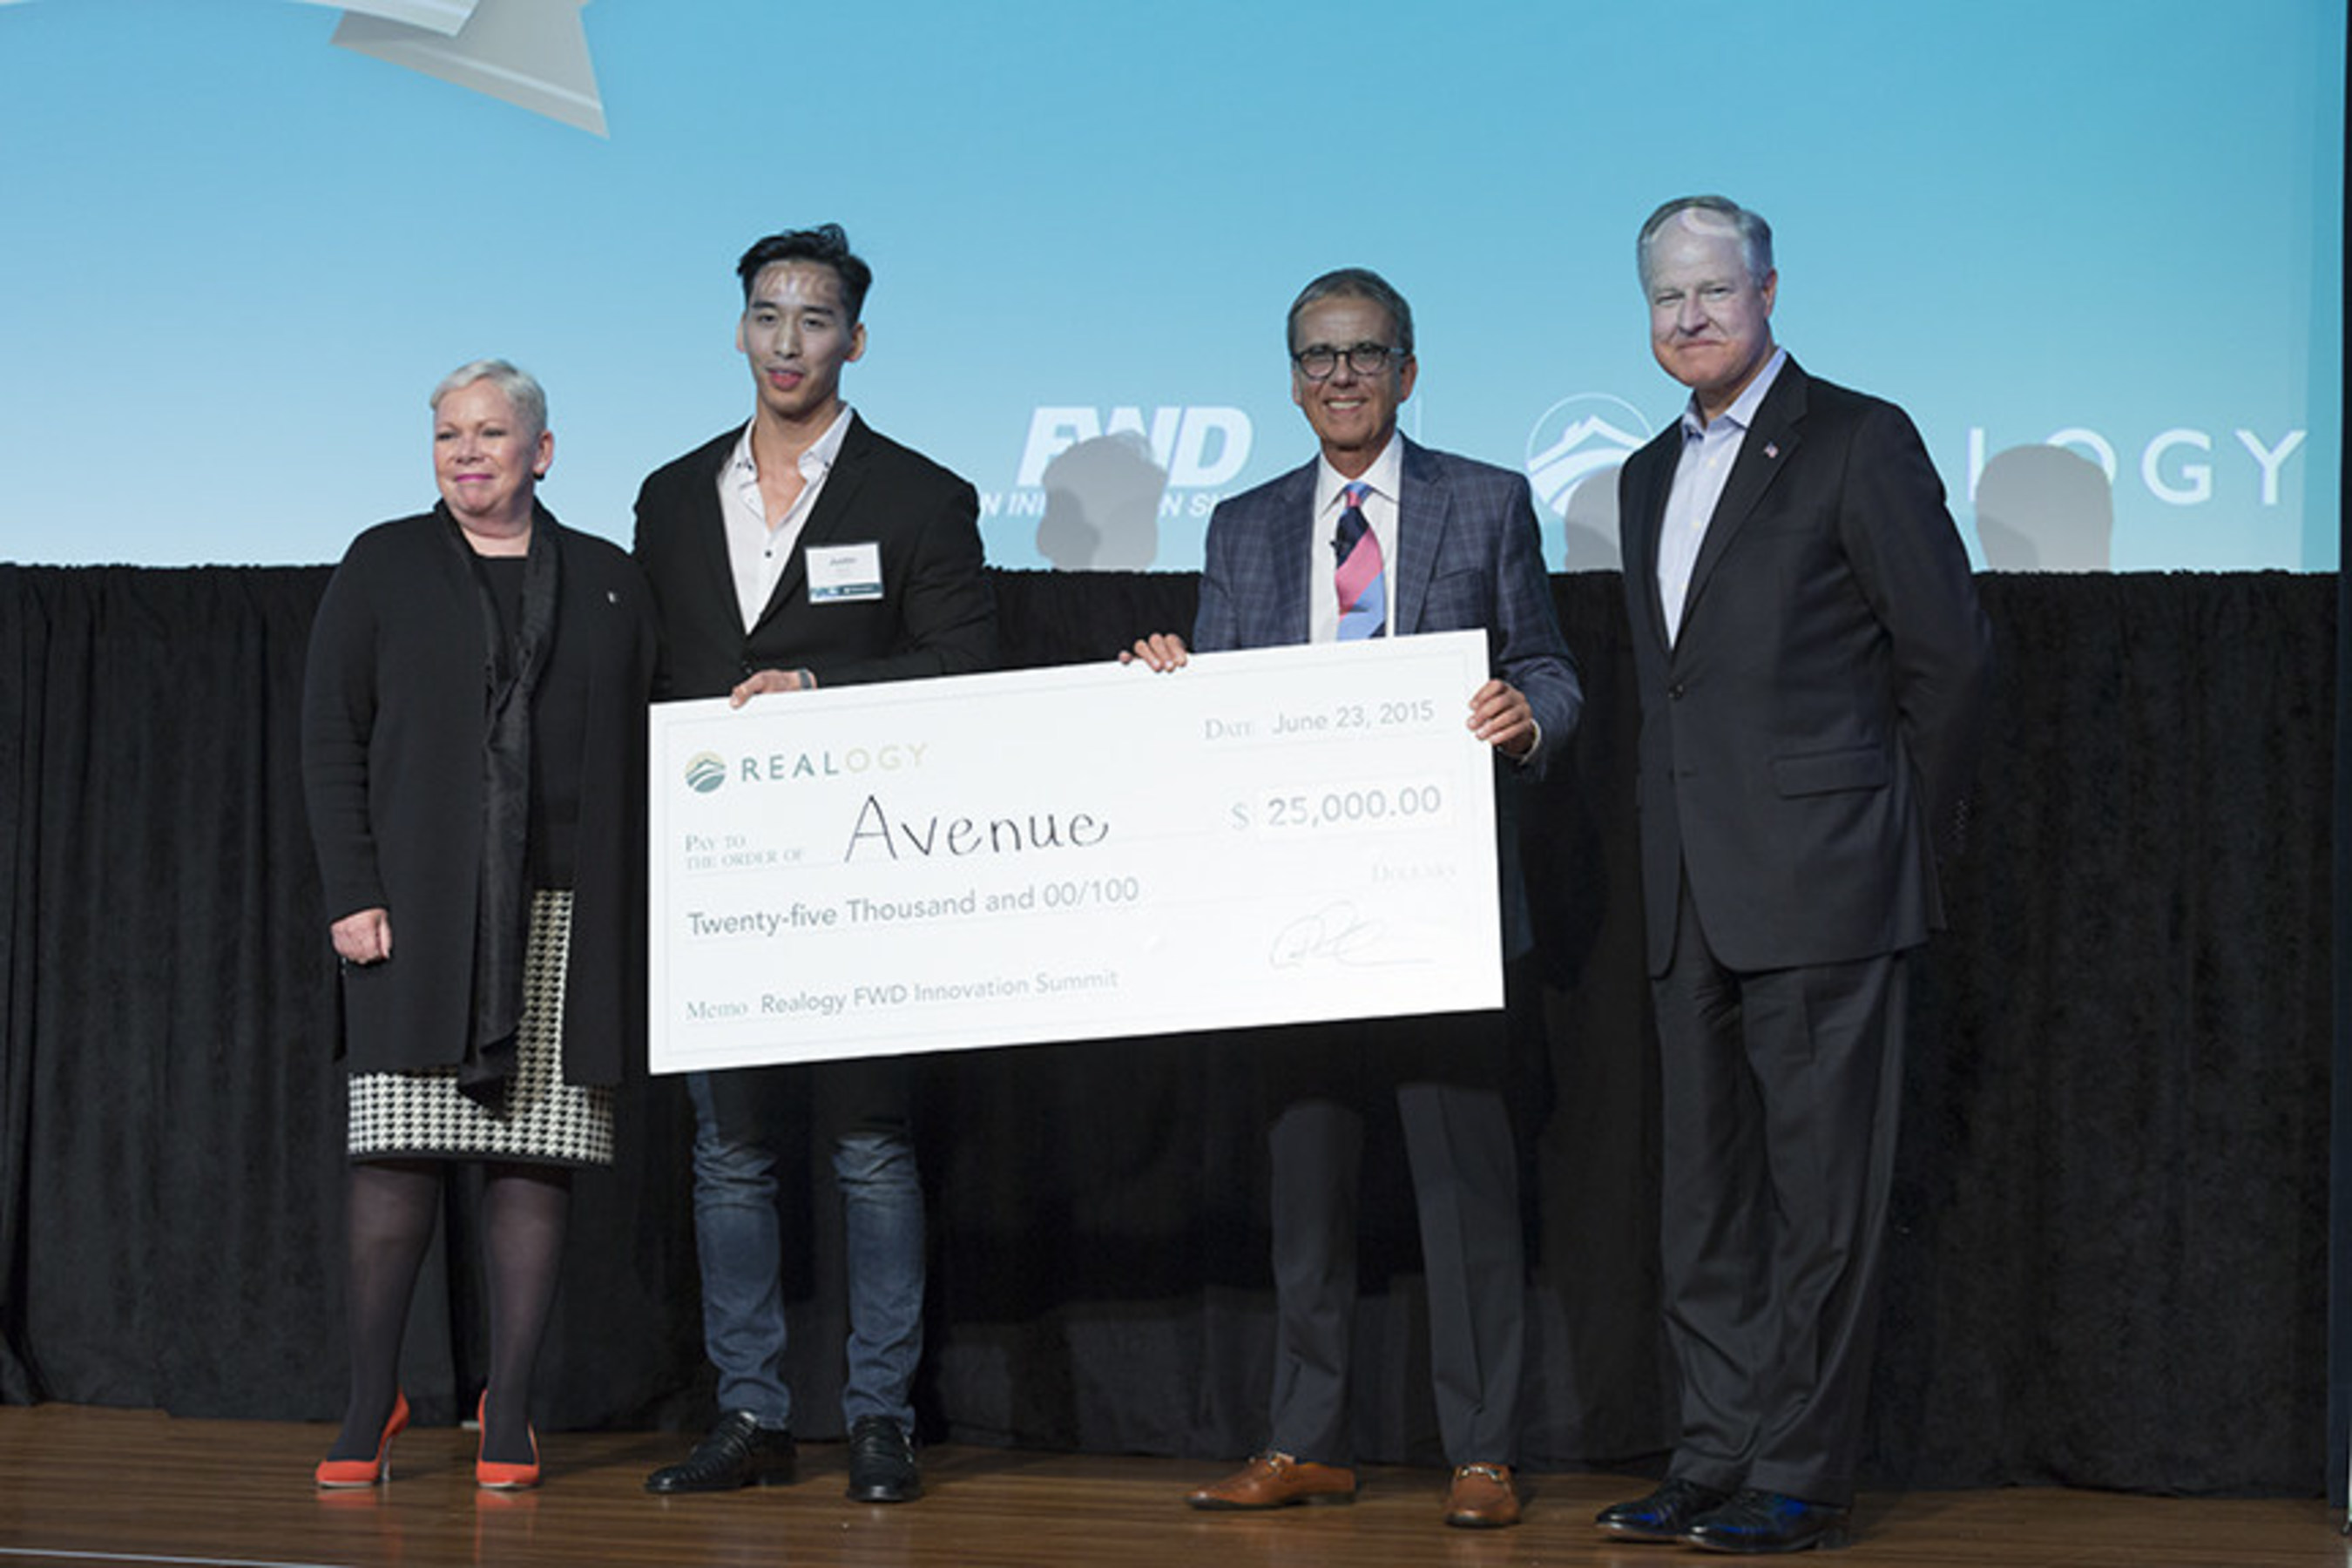 Avenue CEO Justin Shum (second from left) accepts the grand prize at the 2015 Realogy FWD Innovation Summit from Realogy executives (right to left) Richard Smith, Alex Perriello and Sherry Chris.